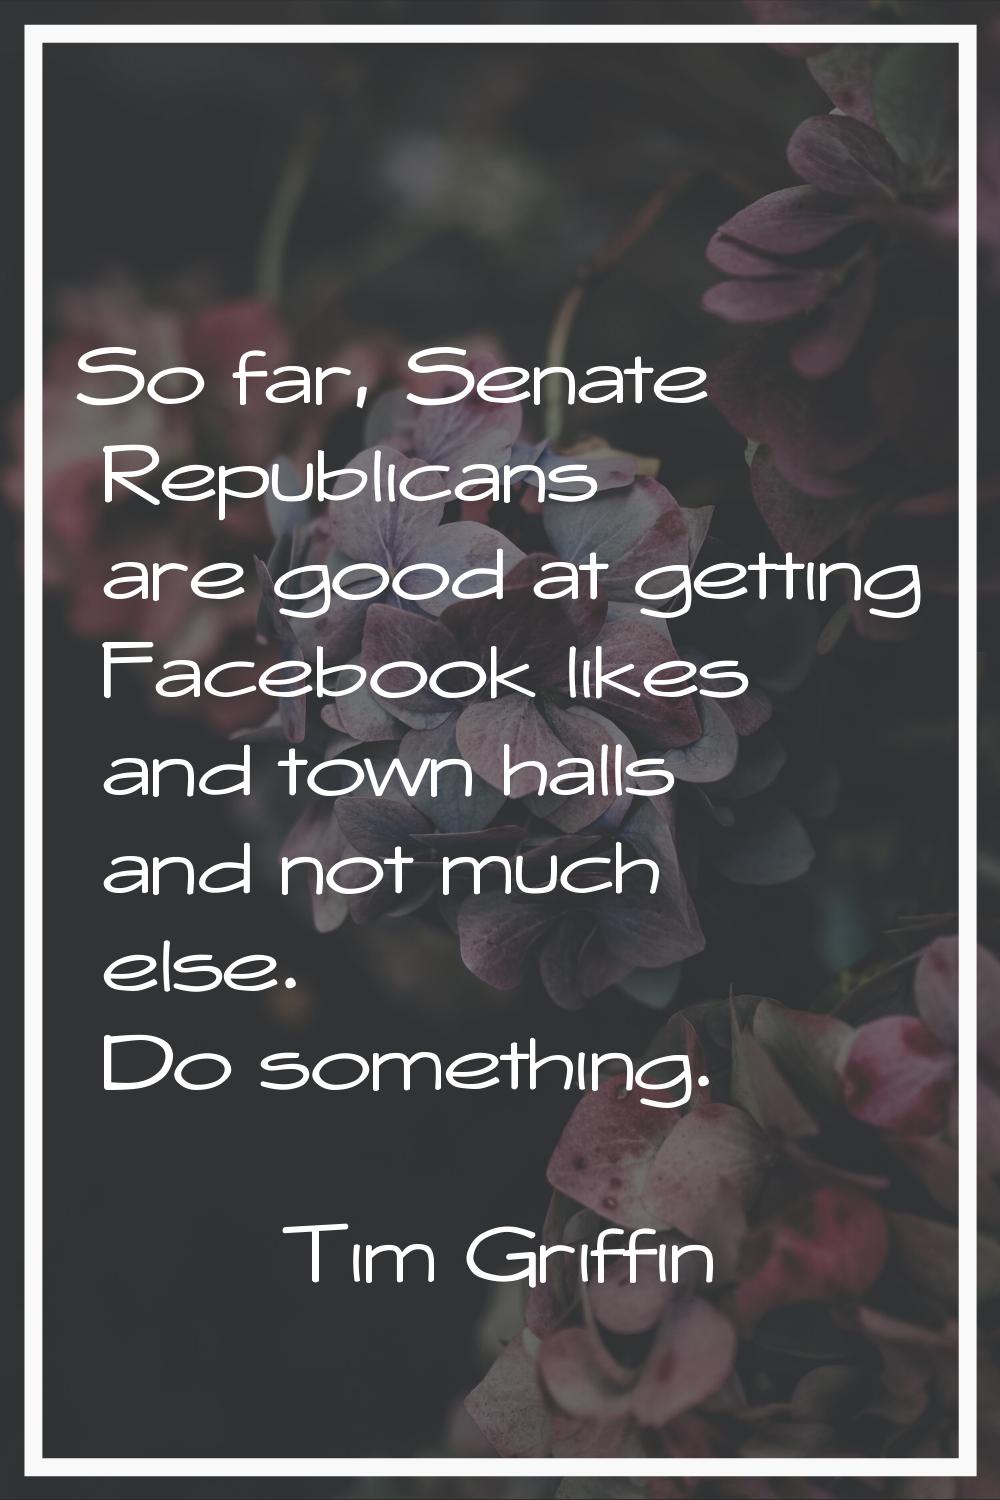 So far, Senate Republicans are good at getting Facebook likes and town halls and not much else. Do 